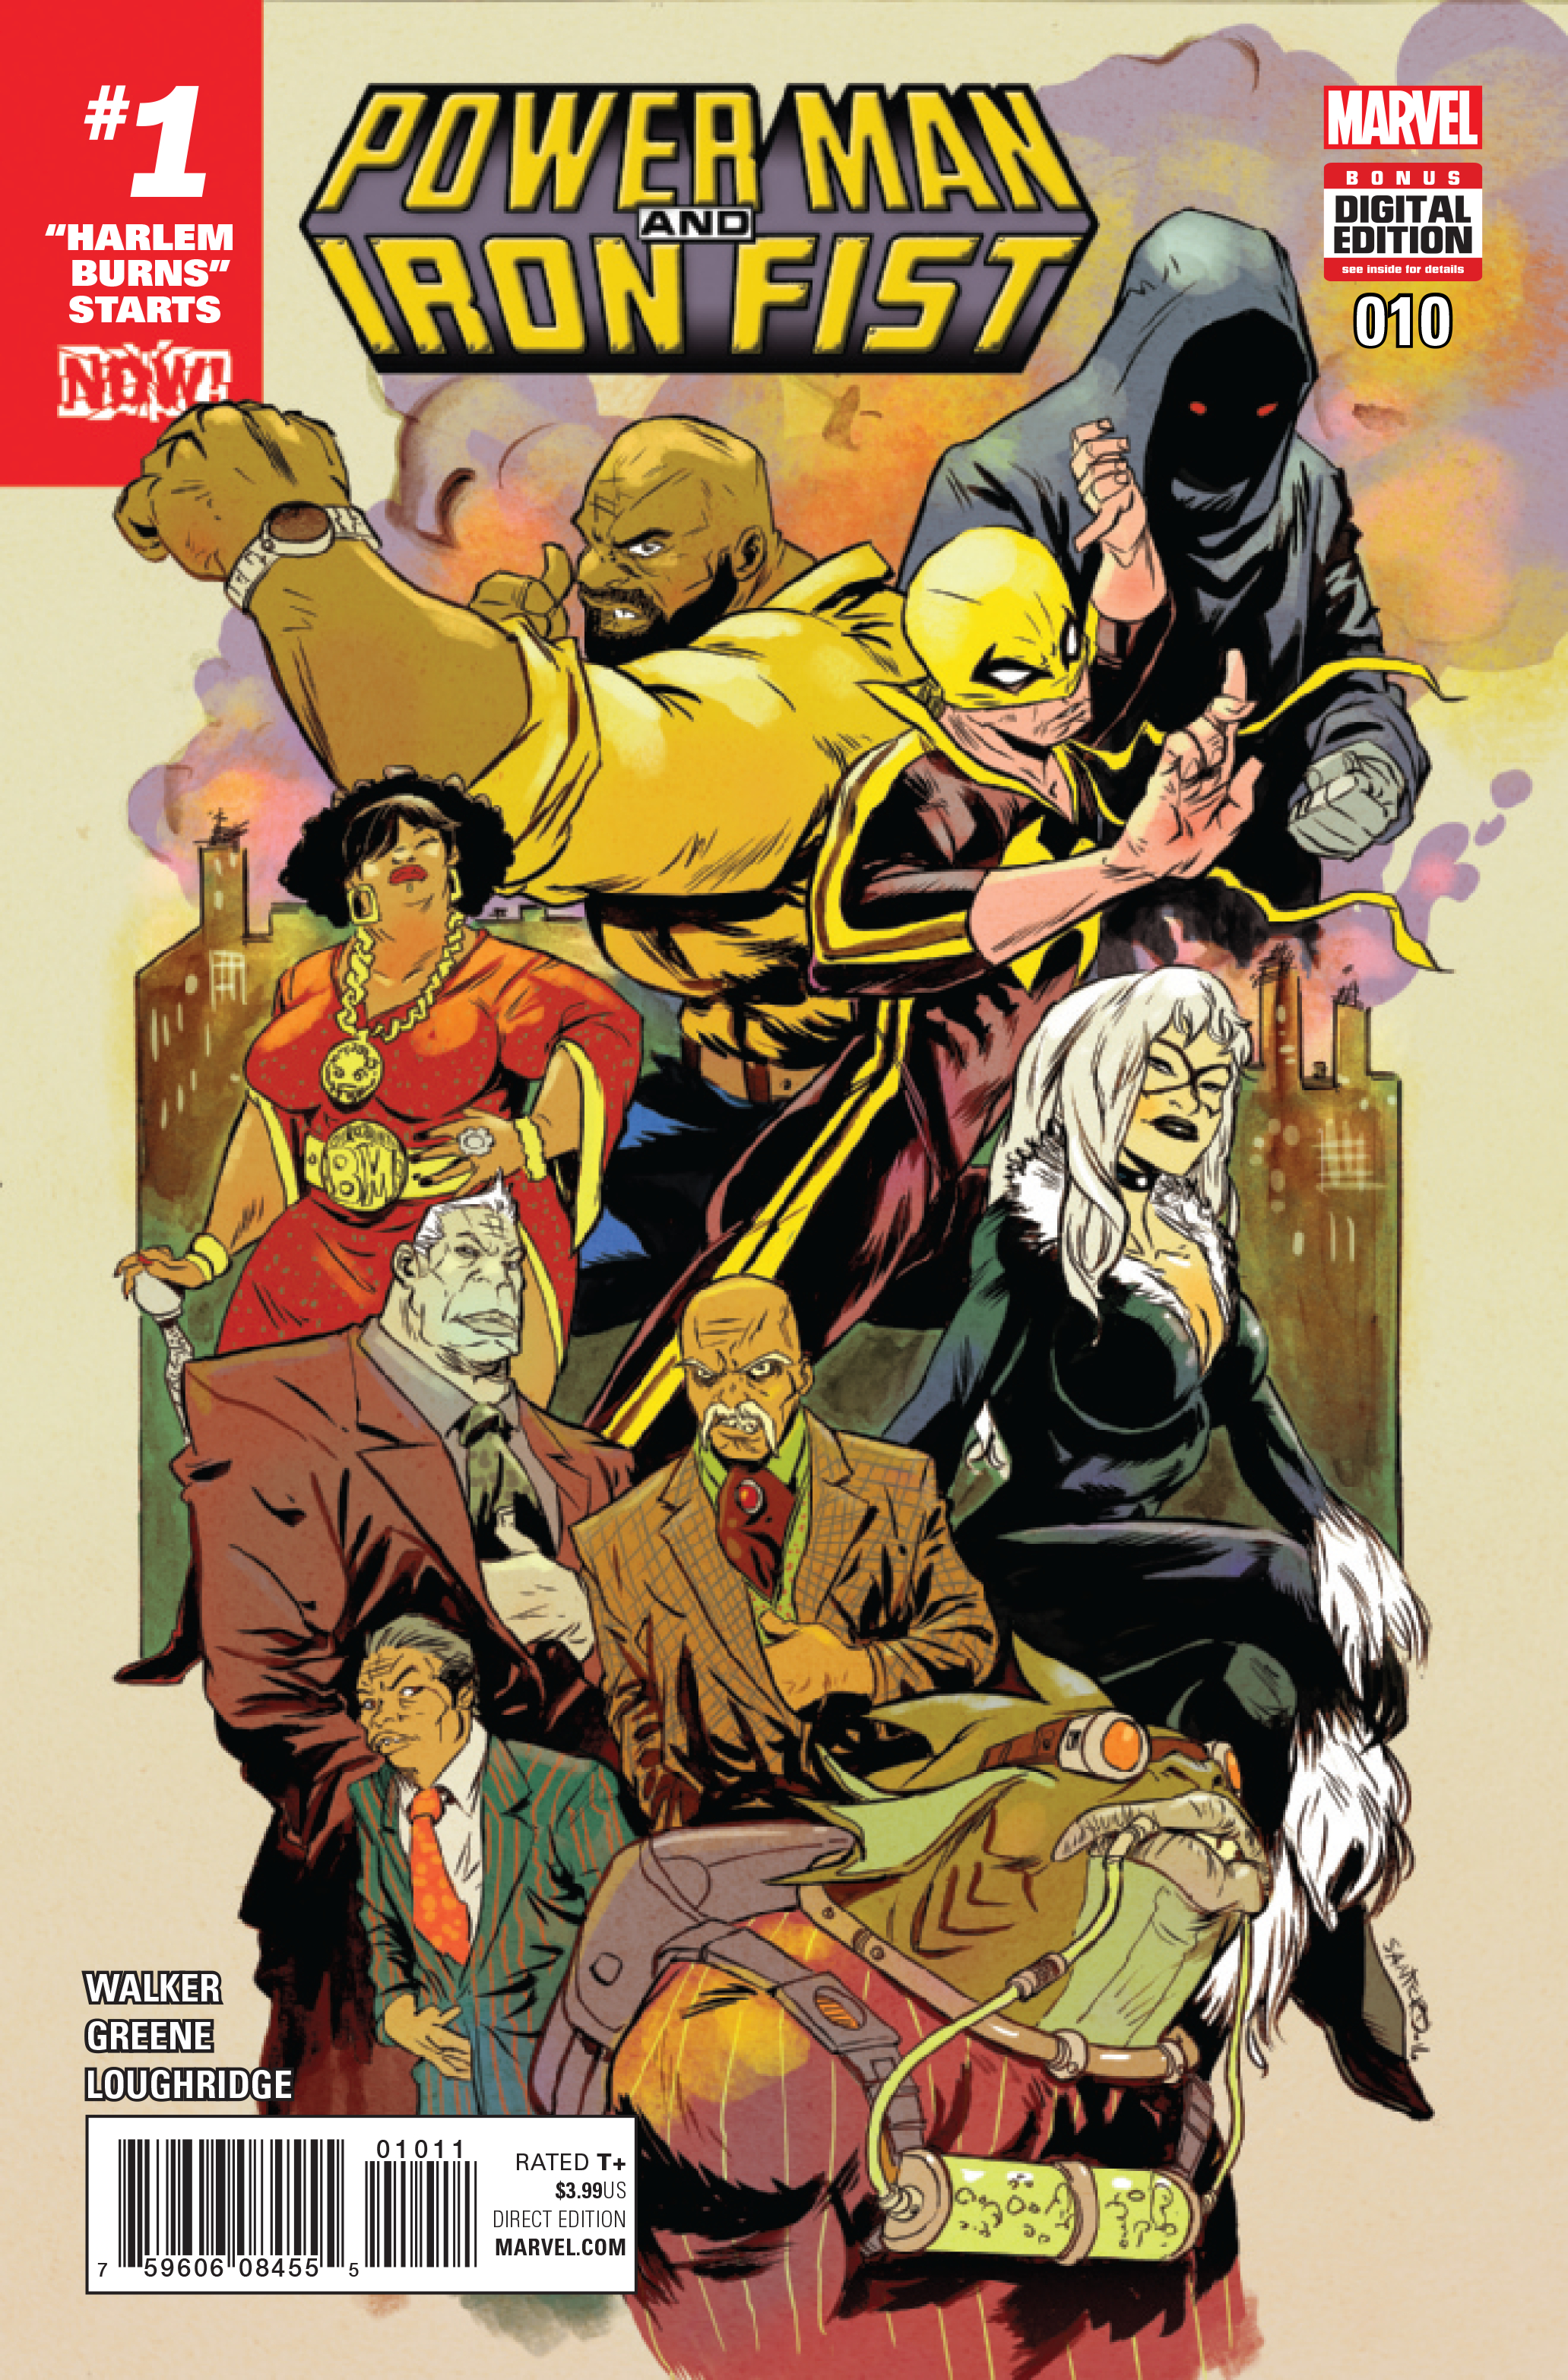 POWER MAN AND IRON FIST #10 NOW